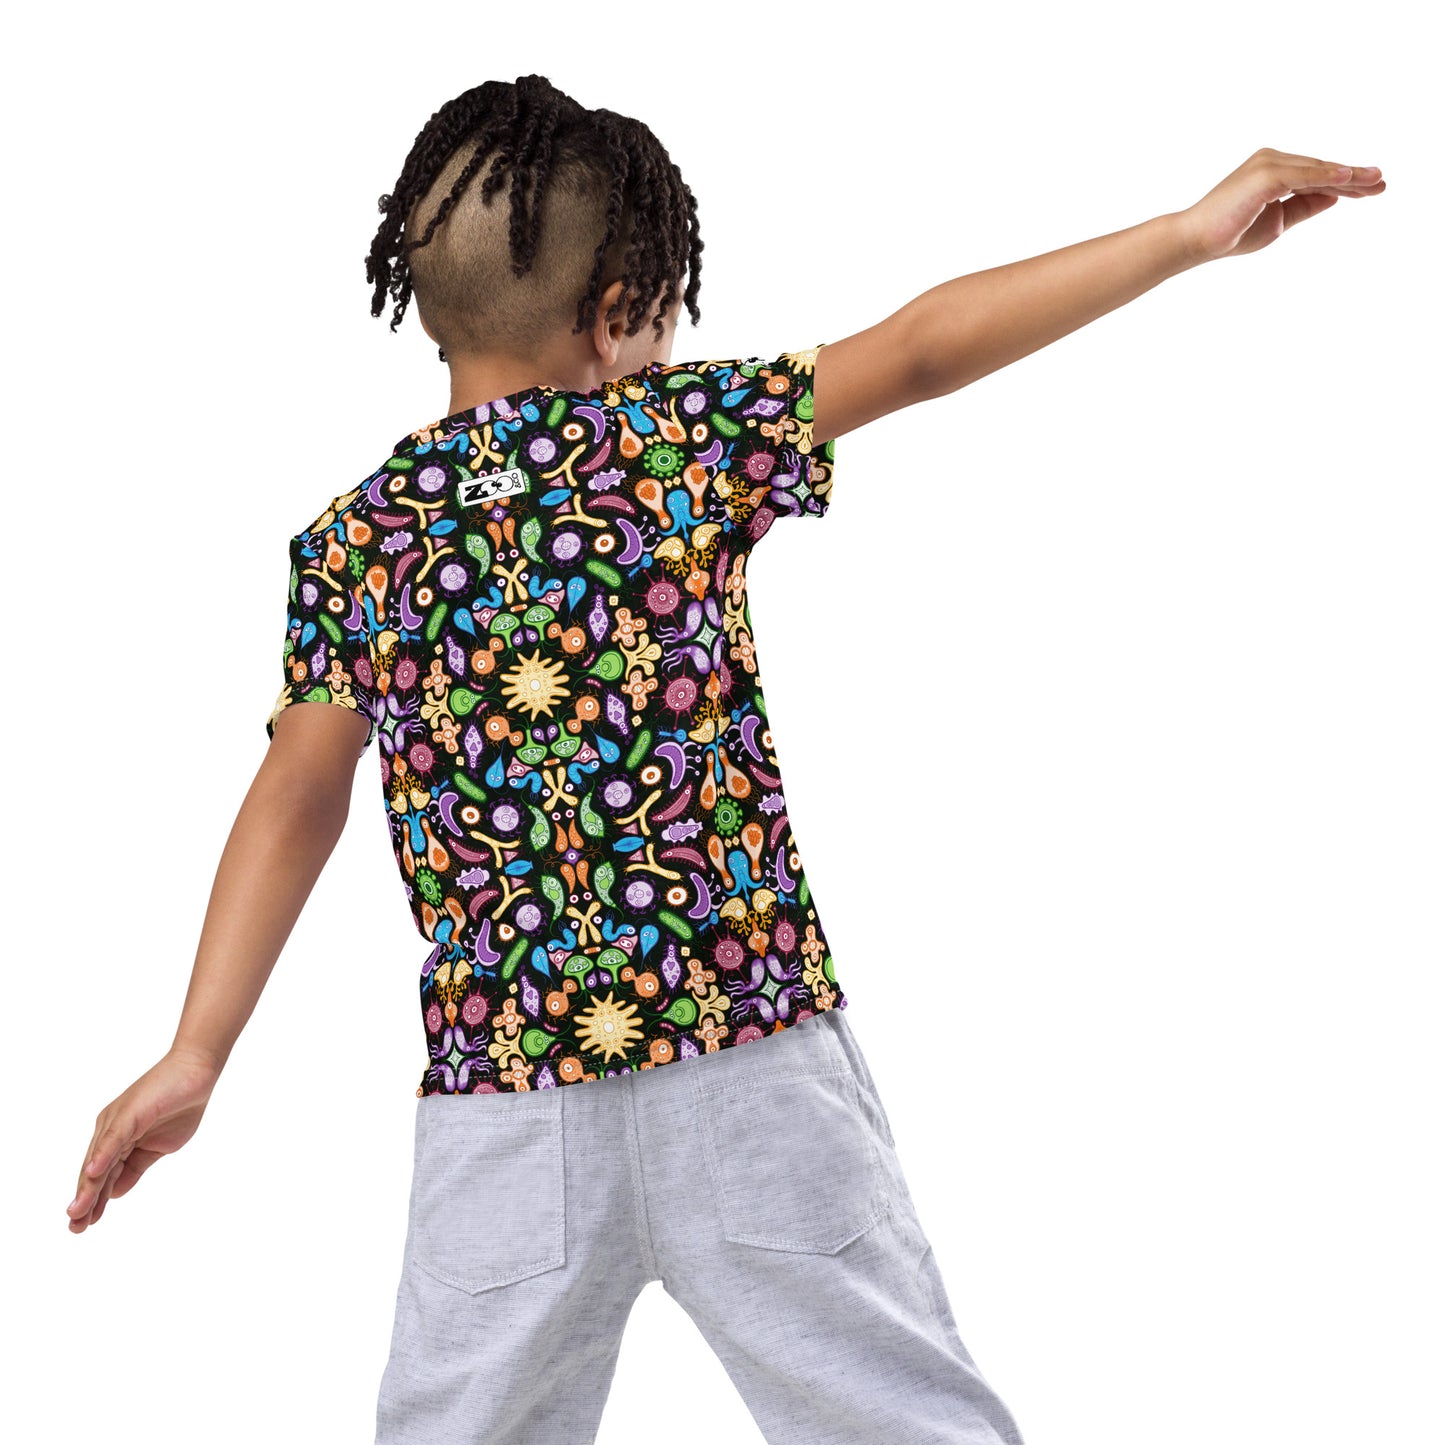 Don't be afraid of microorganisms Kids crew neck t-shirt. Back view